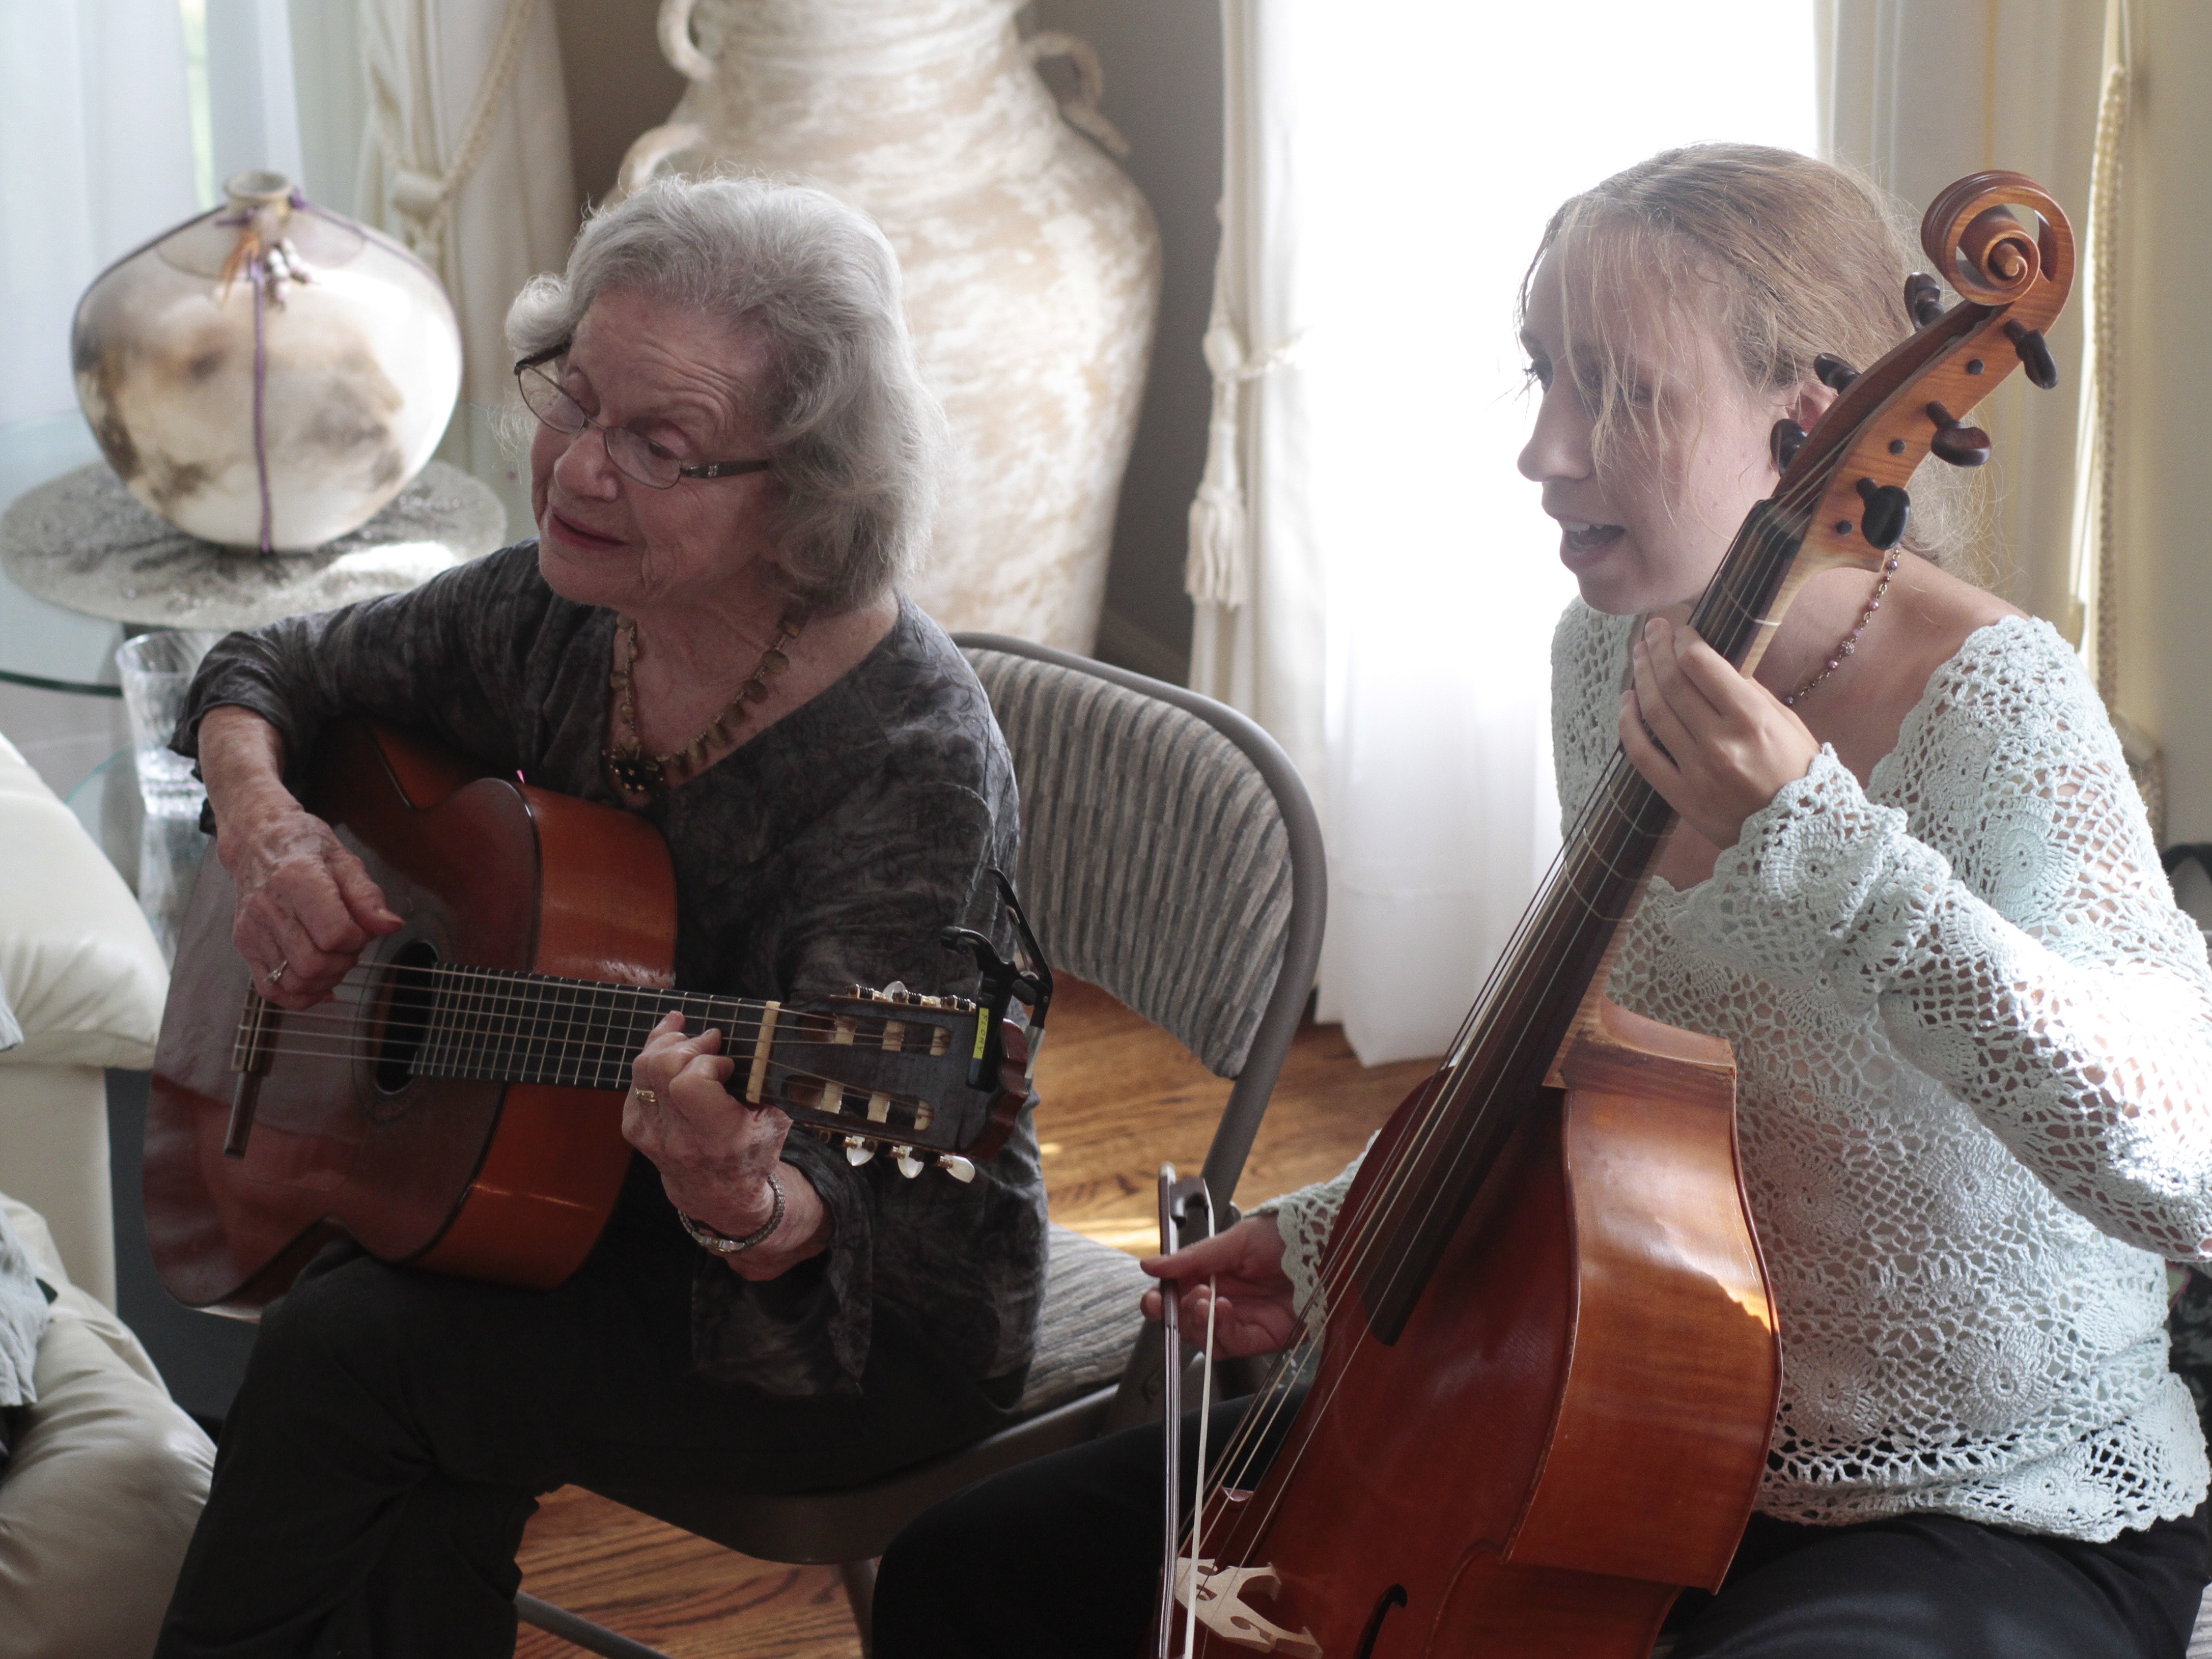 Singer and instrumentalist Flory Jagoda (left) performing with viola da gamba player Heather Spence at an event in Potomac, Md. in 2012. Jagoda died on Jan. 29. CREDIT: Dayna Smith/The Washington Post via Getty Images